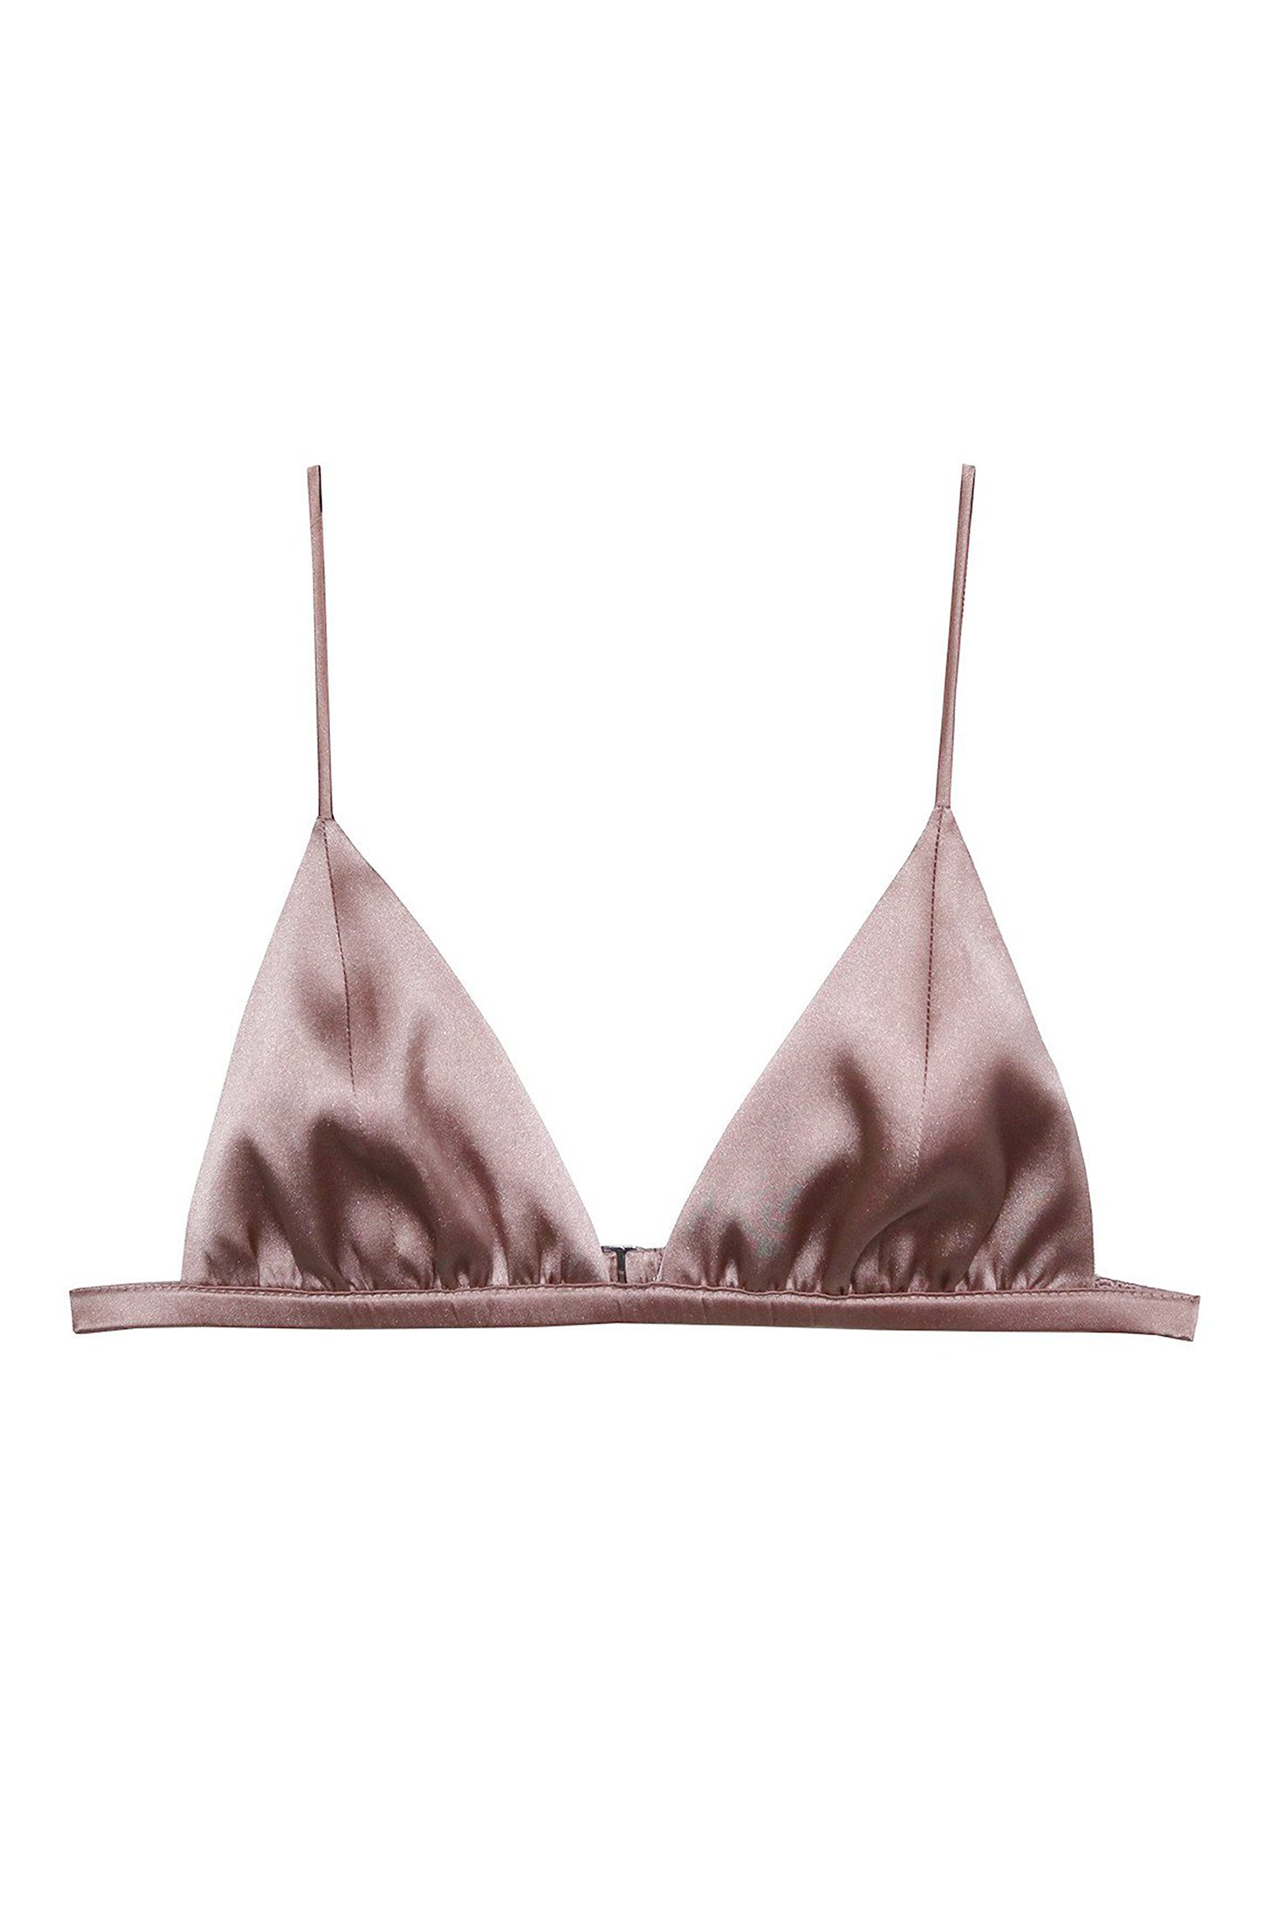 Satin Rose Gold Rose Embroidered Triangle Bra